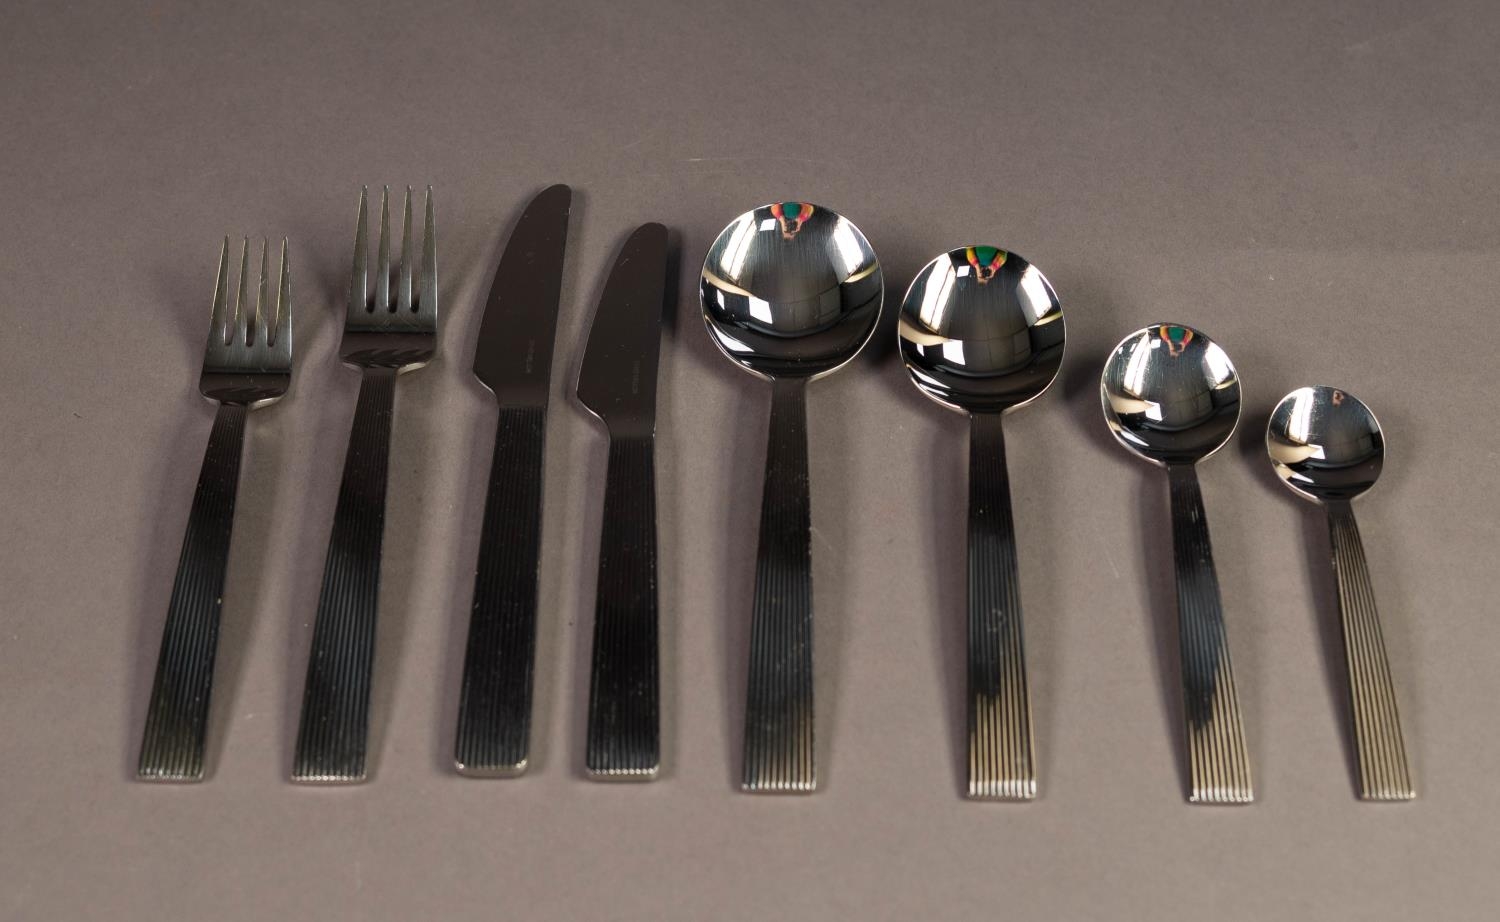 FORTY EIGHT PIECE DAVID MELLOR ?FLUTE SET? PATTERN SERVICE OF STAINLESS STEEL CUTLERY FOR SIX